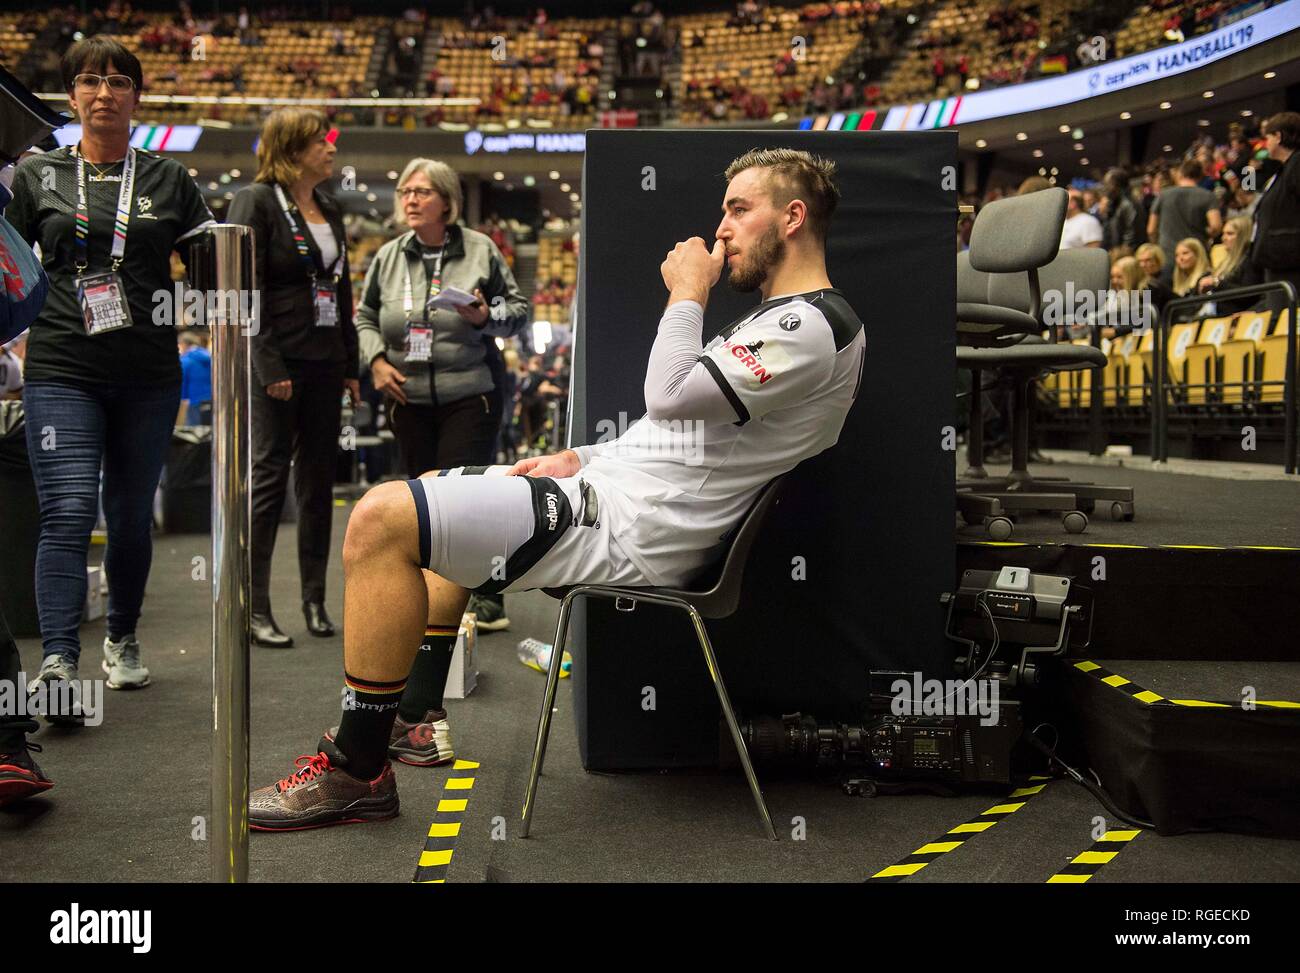 Jannik KOHLBACHER (GER) disappointed after the match, match for 3rd place, Germany (GER) - France (FRA), on 27.01.2019 in Herning/Denmark Handball World Cup 2019, from 10.01. - 27.01.2019 in Germany/Denmark. | usage worldwide Stock Photo